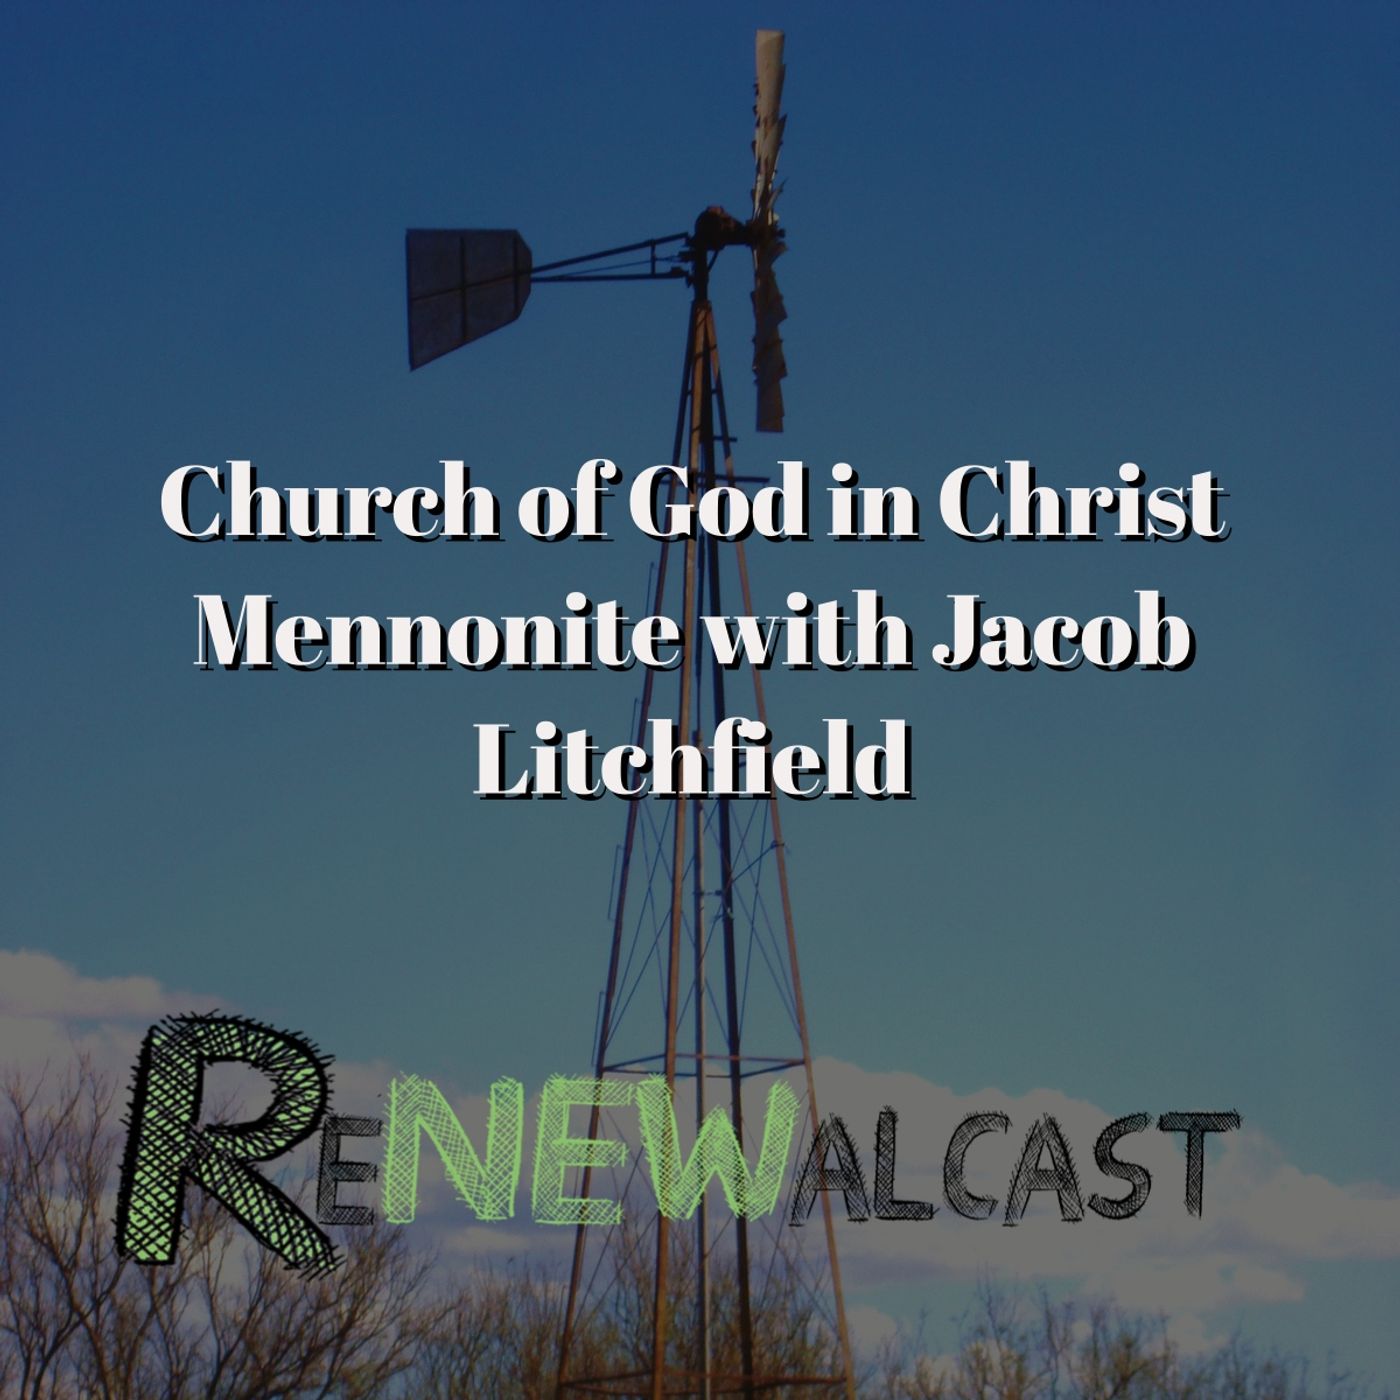 The Church of God in Christ Mennonites with Jacob Litchfield